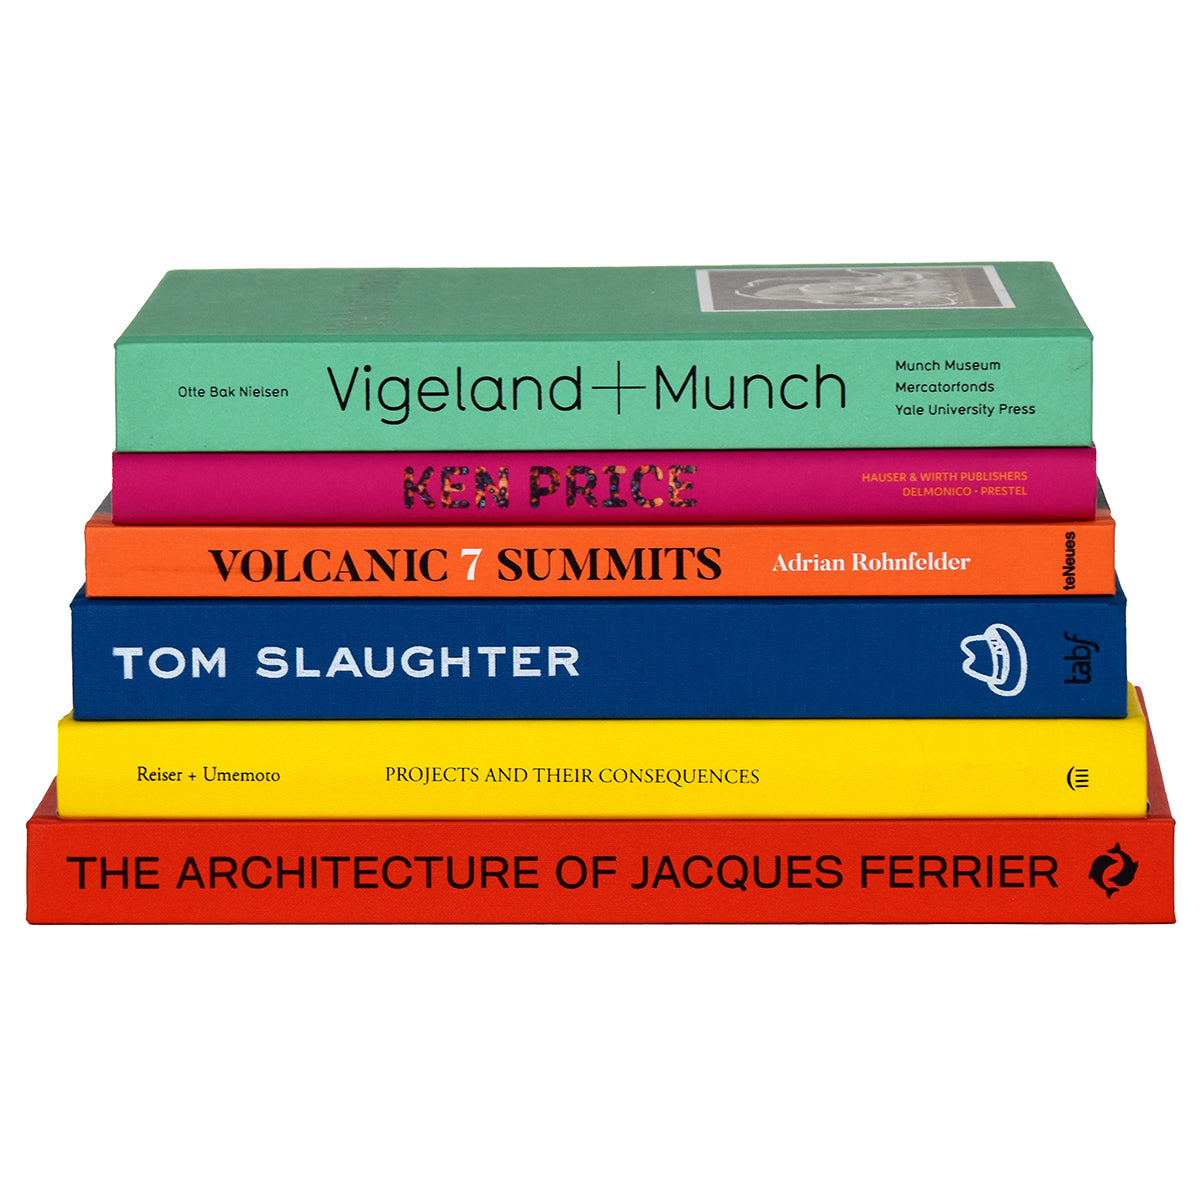 Coffee Table Book Stacks Curated by Color